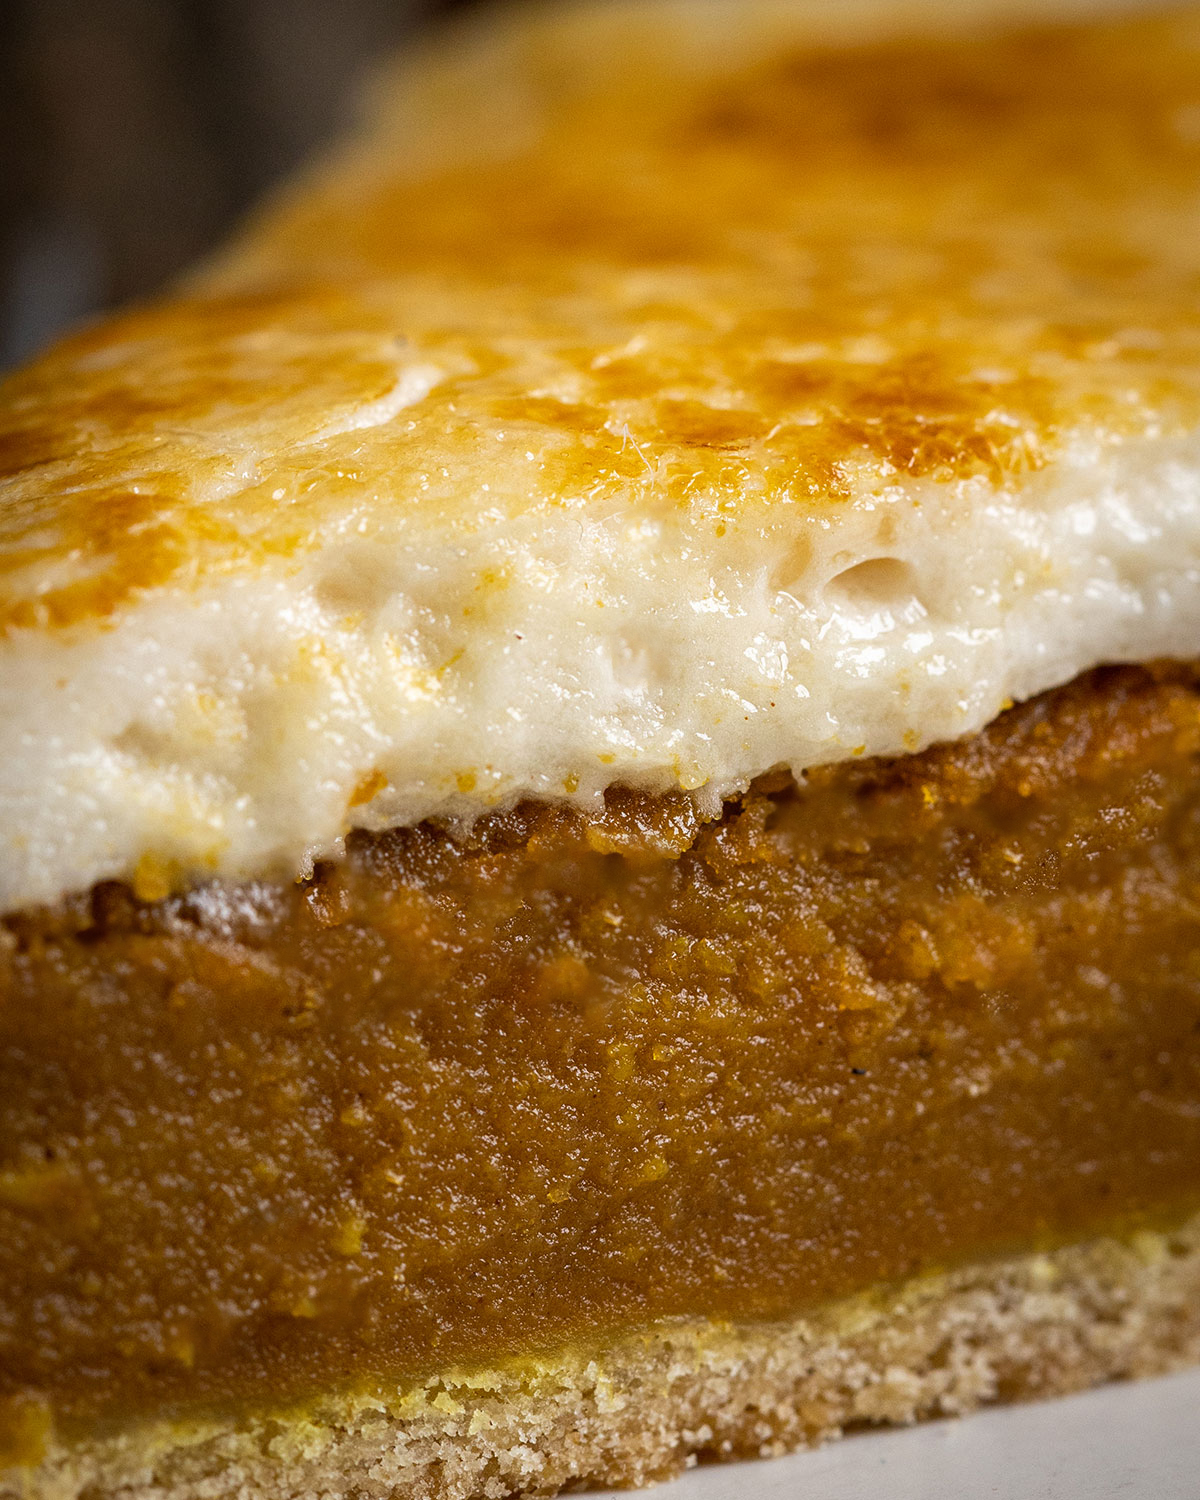 Extremely close up photograph of a vegan sweet potato pie slice, with the layers of home-made pie crust, most sweet potato pie filling and soft vegan marshmallow frosting clearly visible.